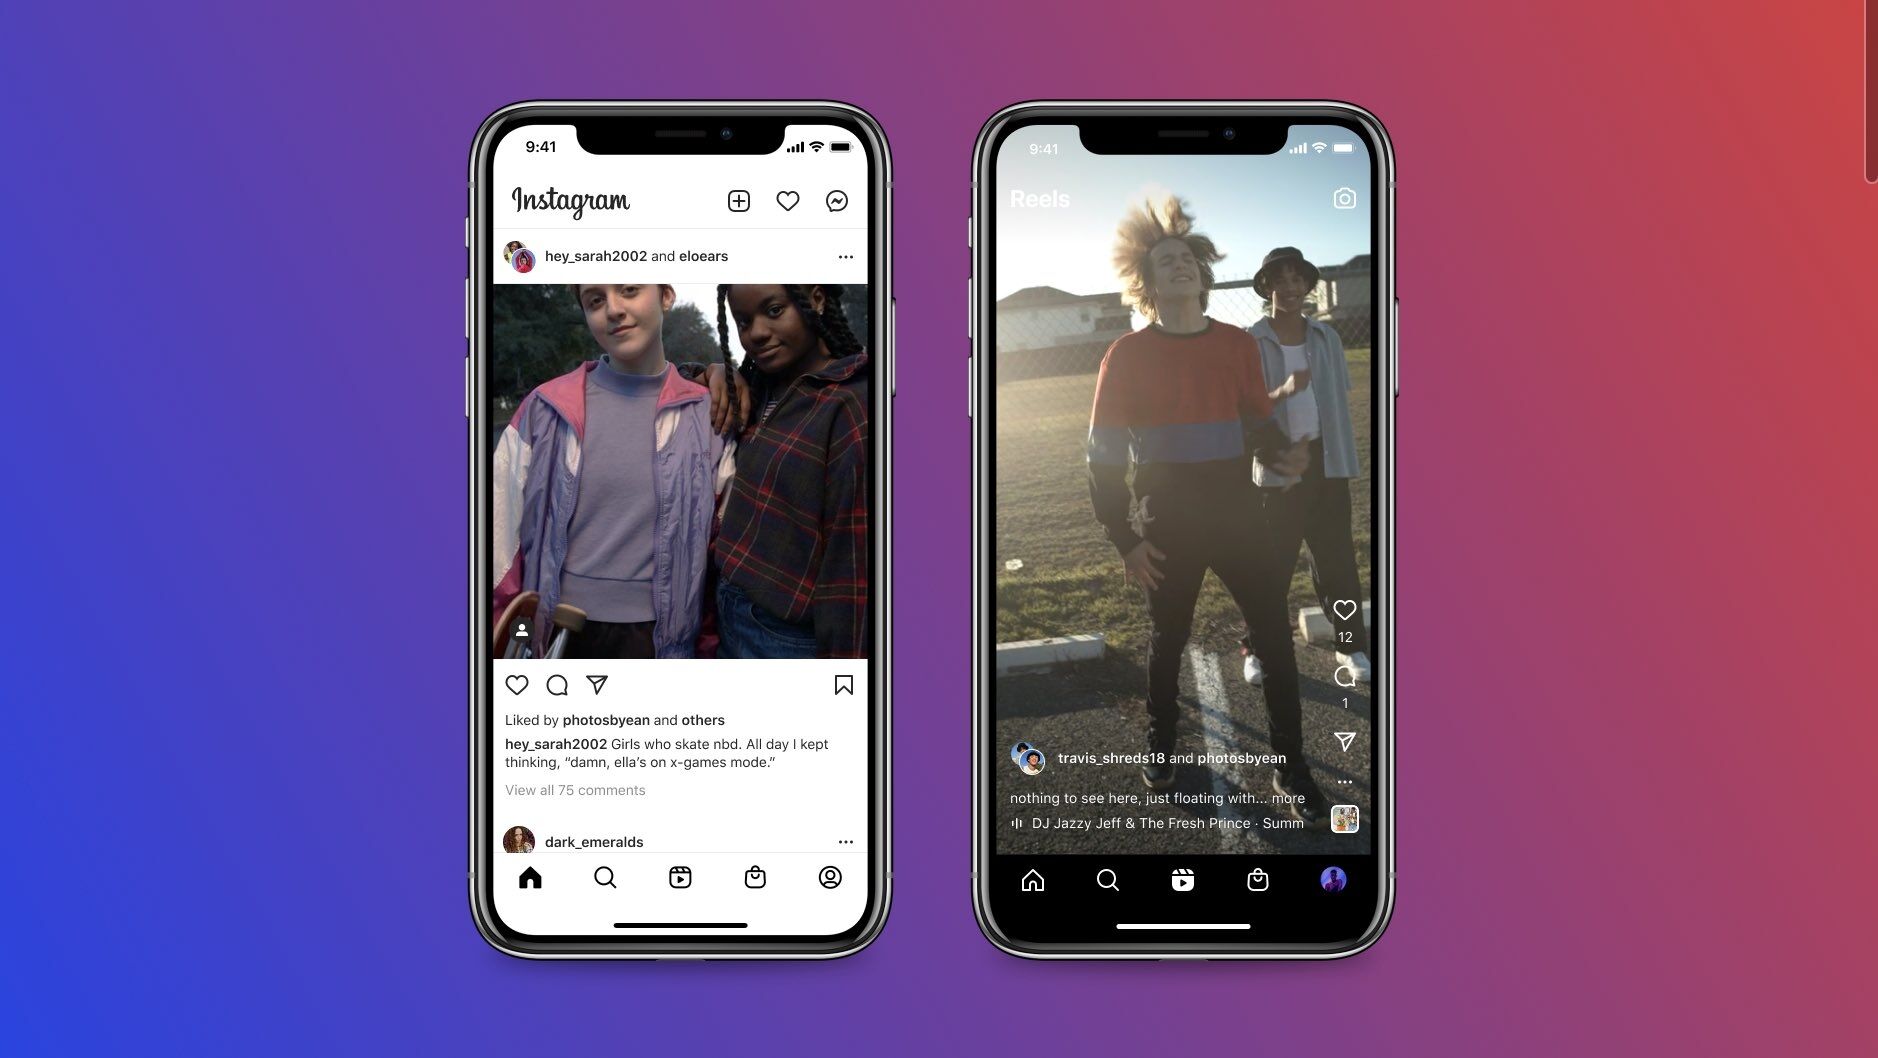 Instagram tests new feature: how will it impact users?